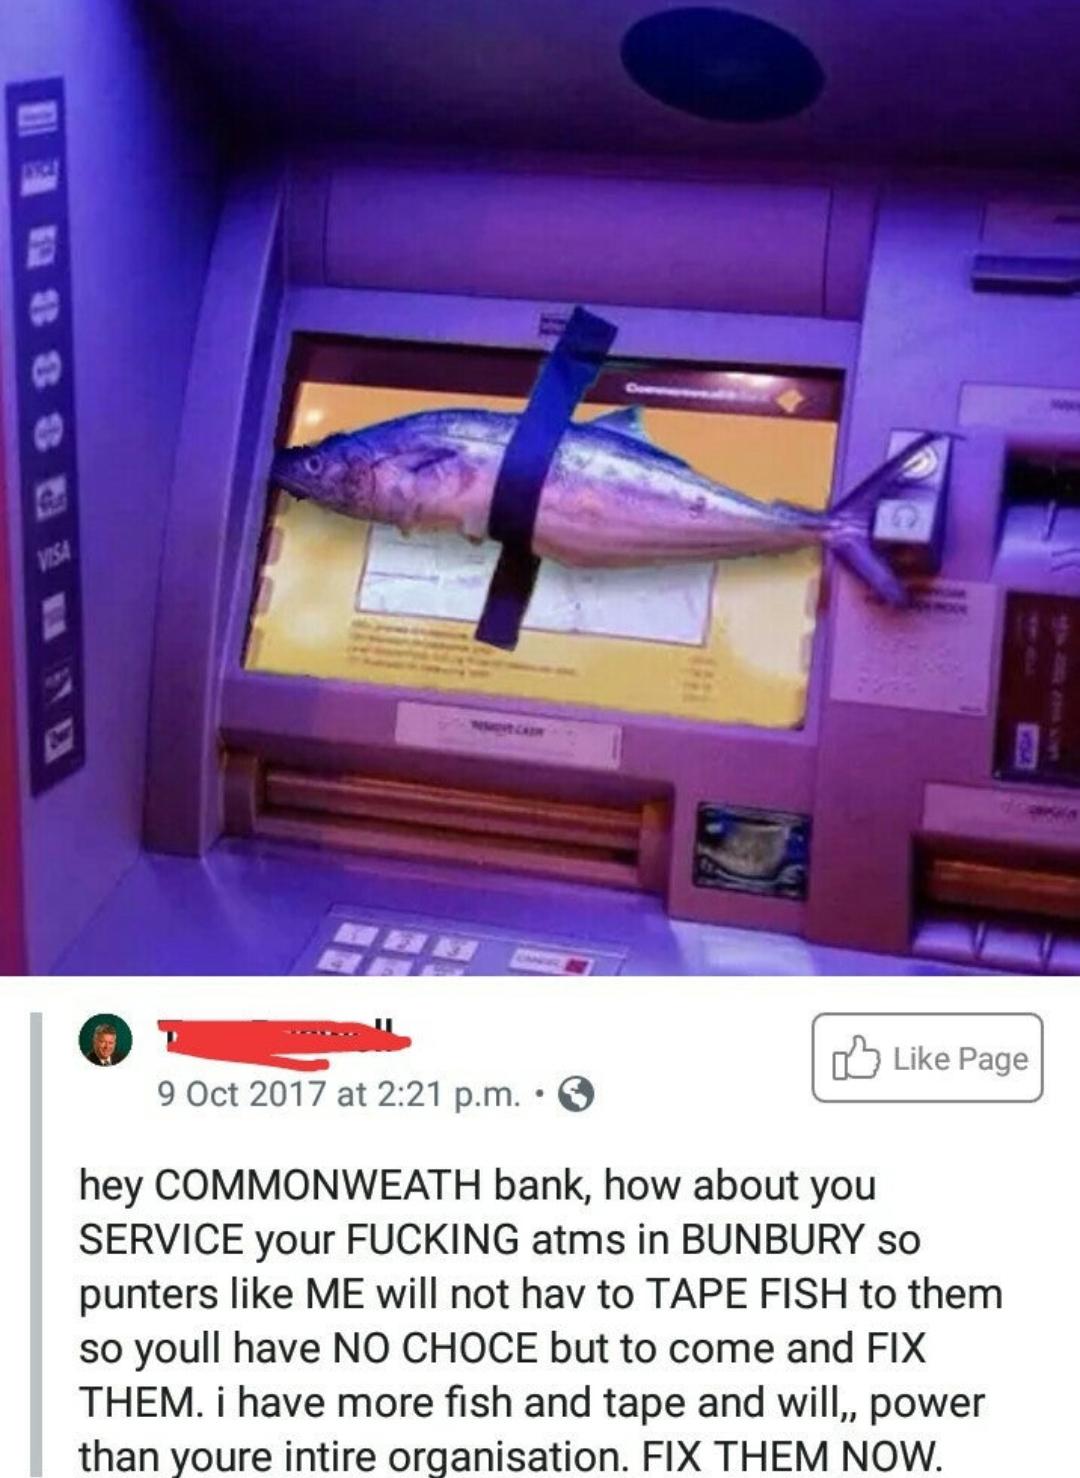 Something fishy about that ATM...